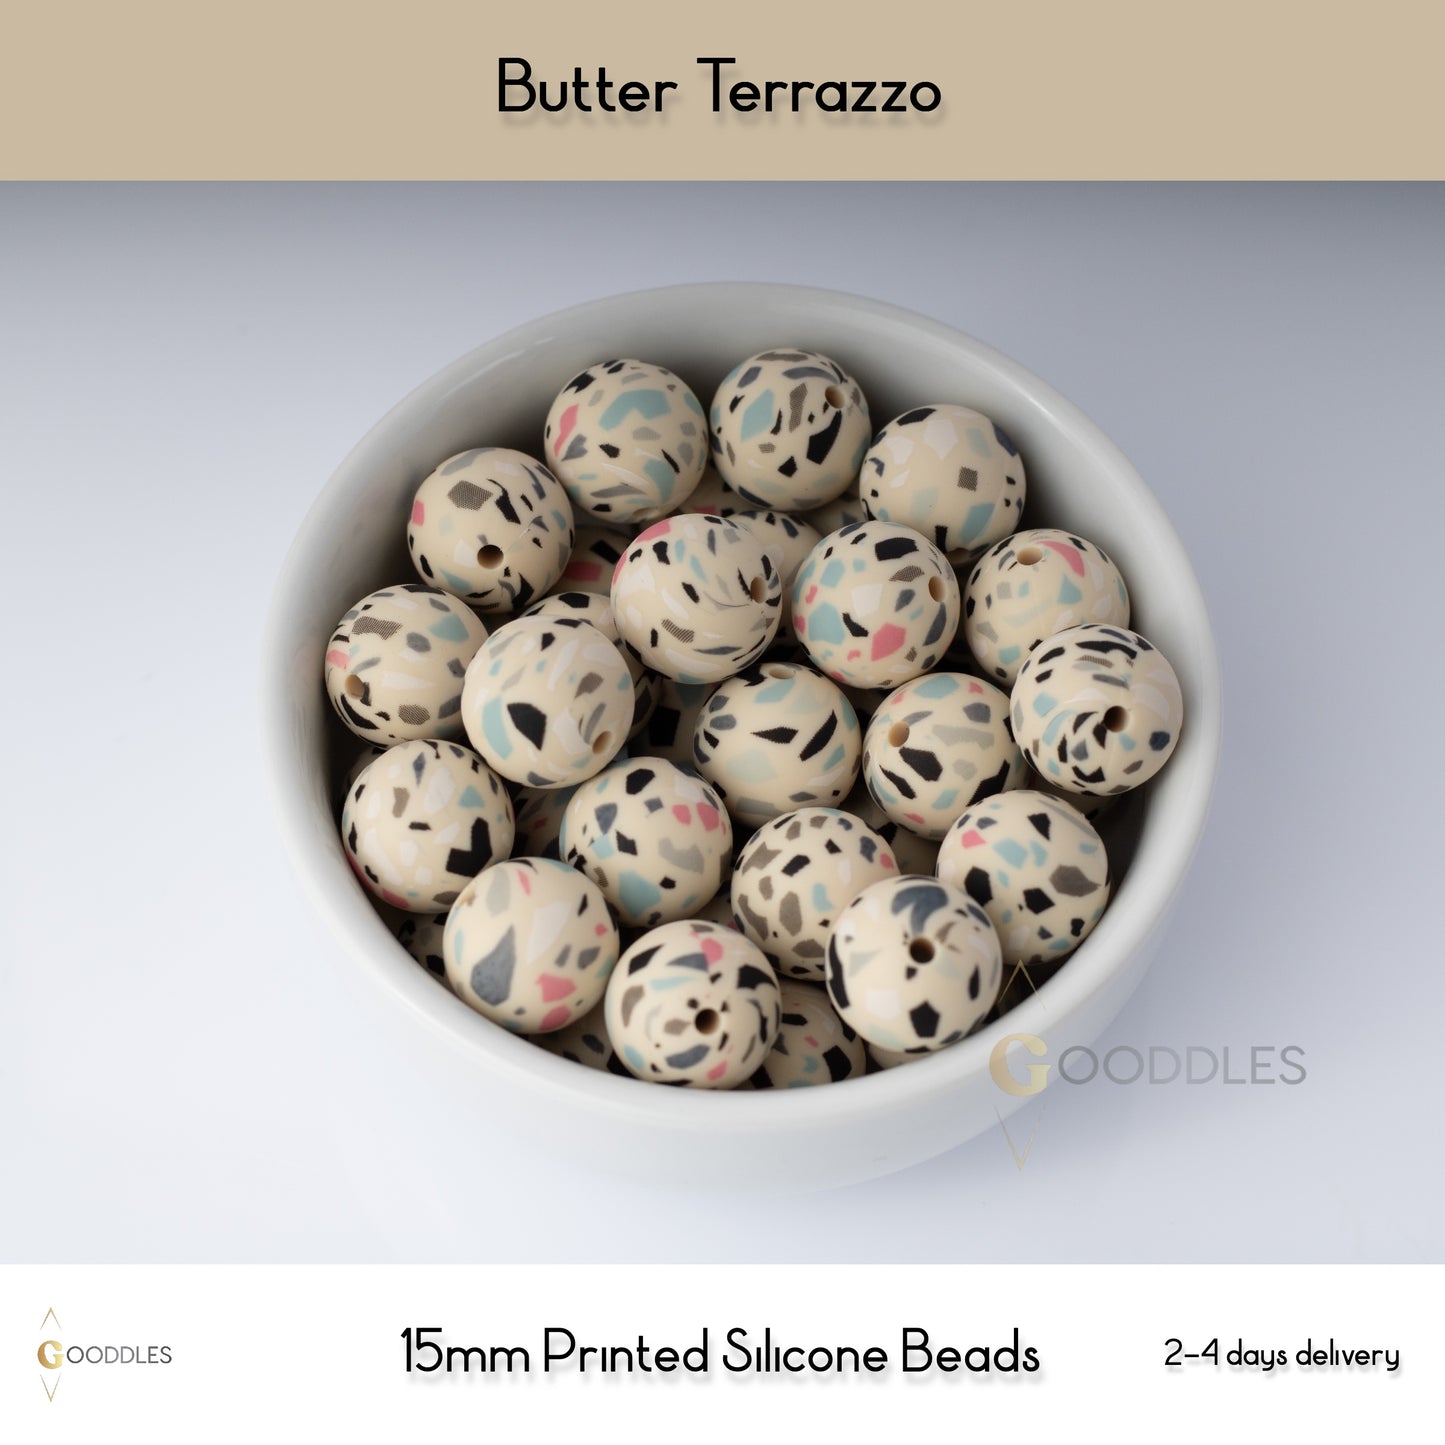 5pcs, Butter Terrazzo Silicone Beads Printed Round Silicone Beads